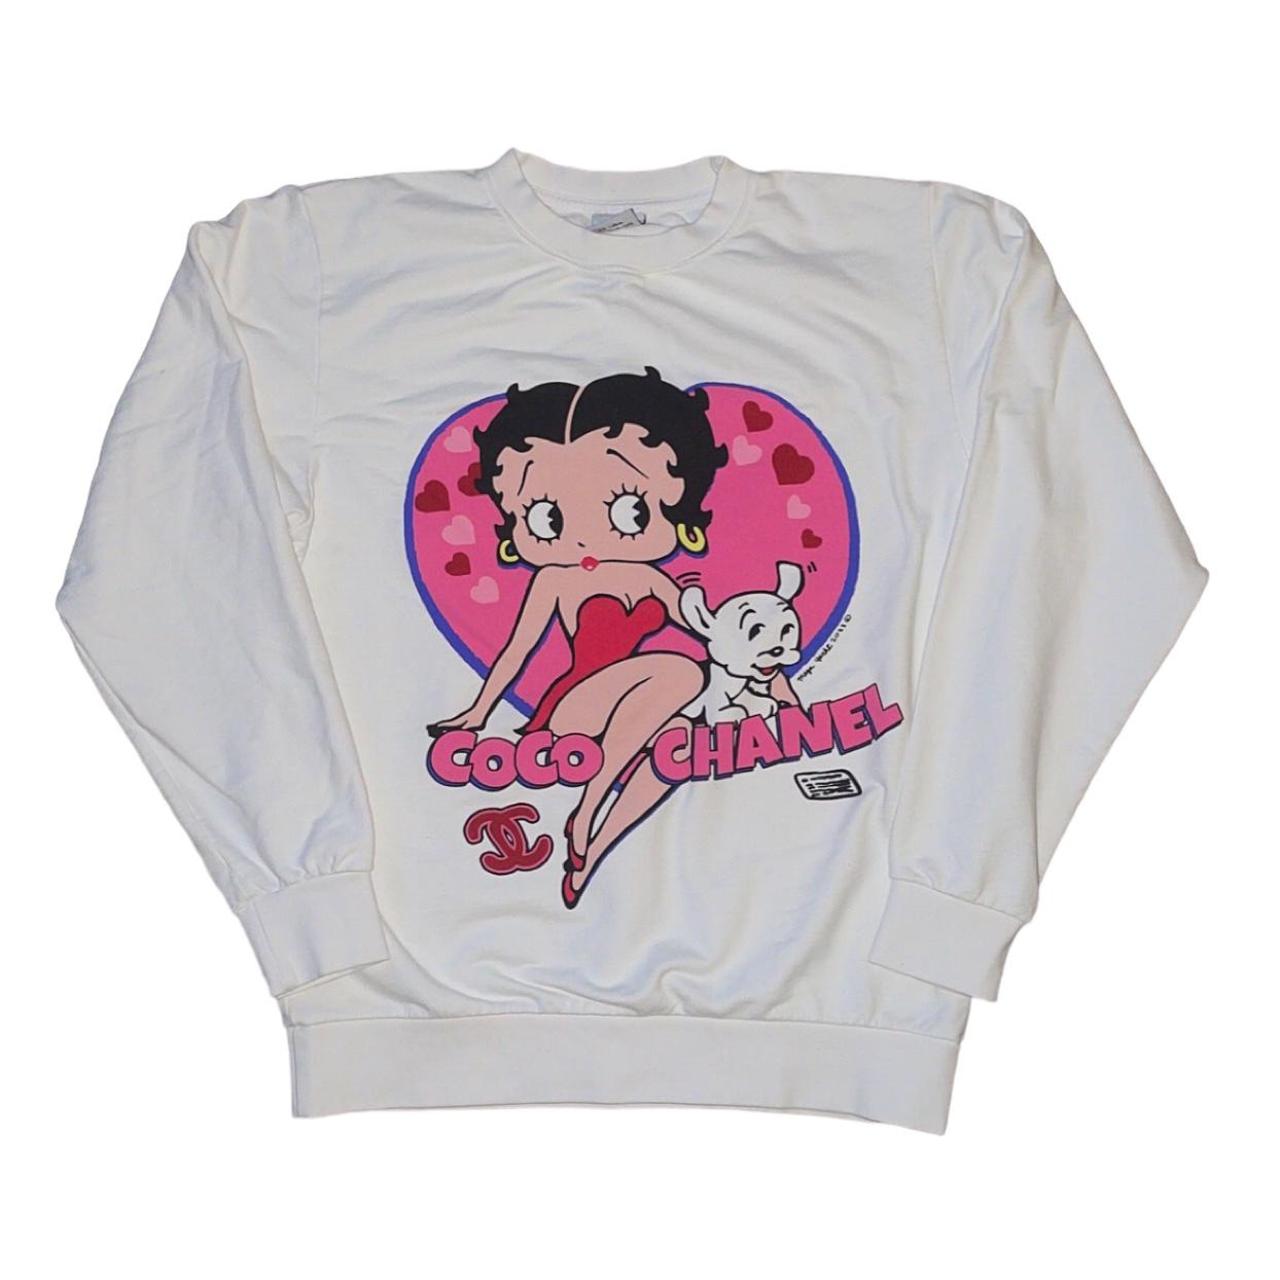 ✿ mega yacht betty boop coco chanel graphic white - Depop